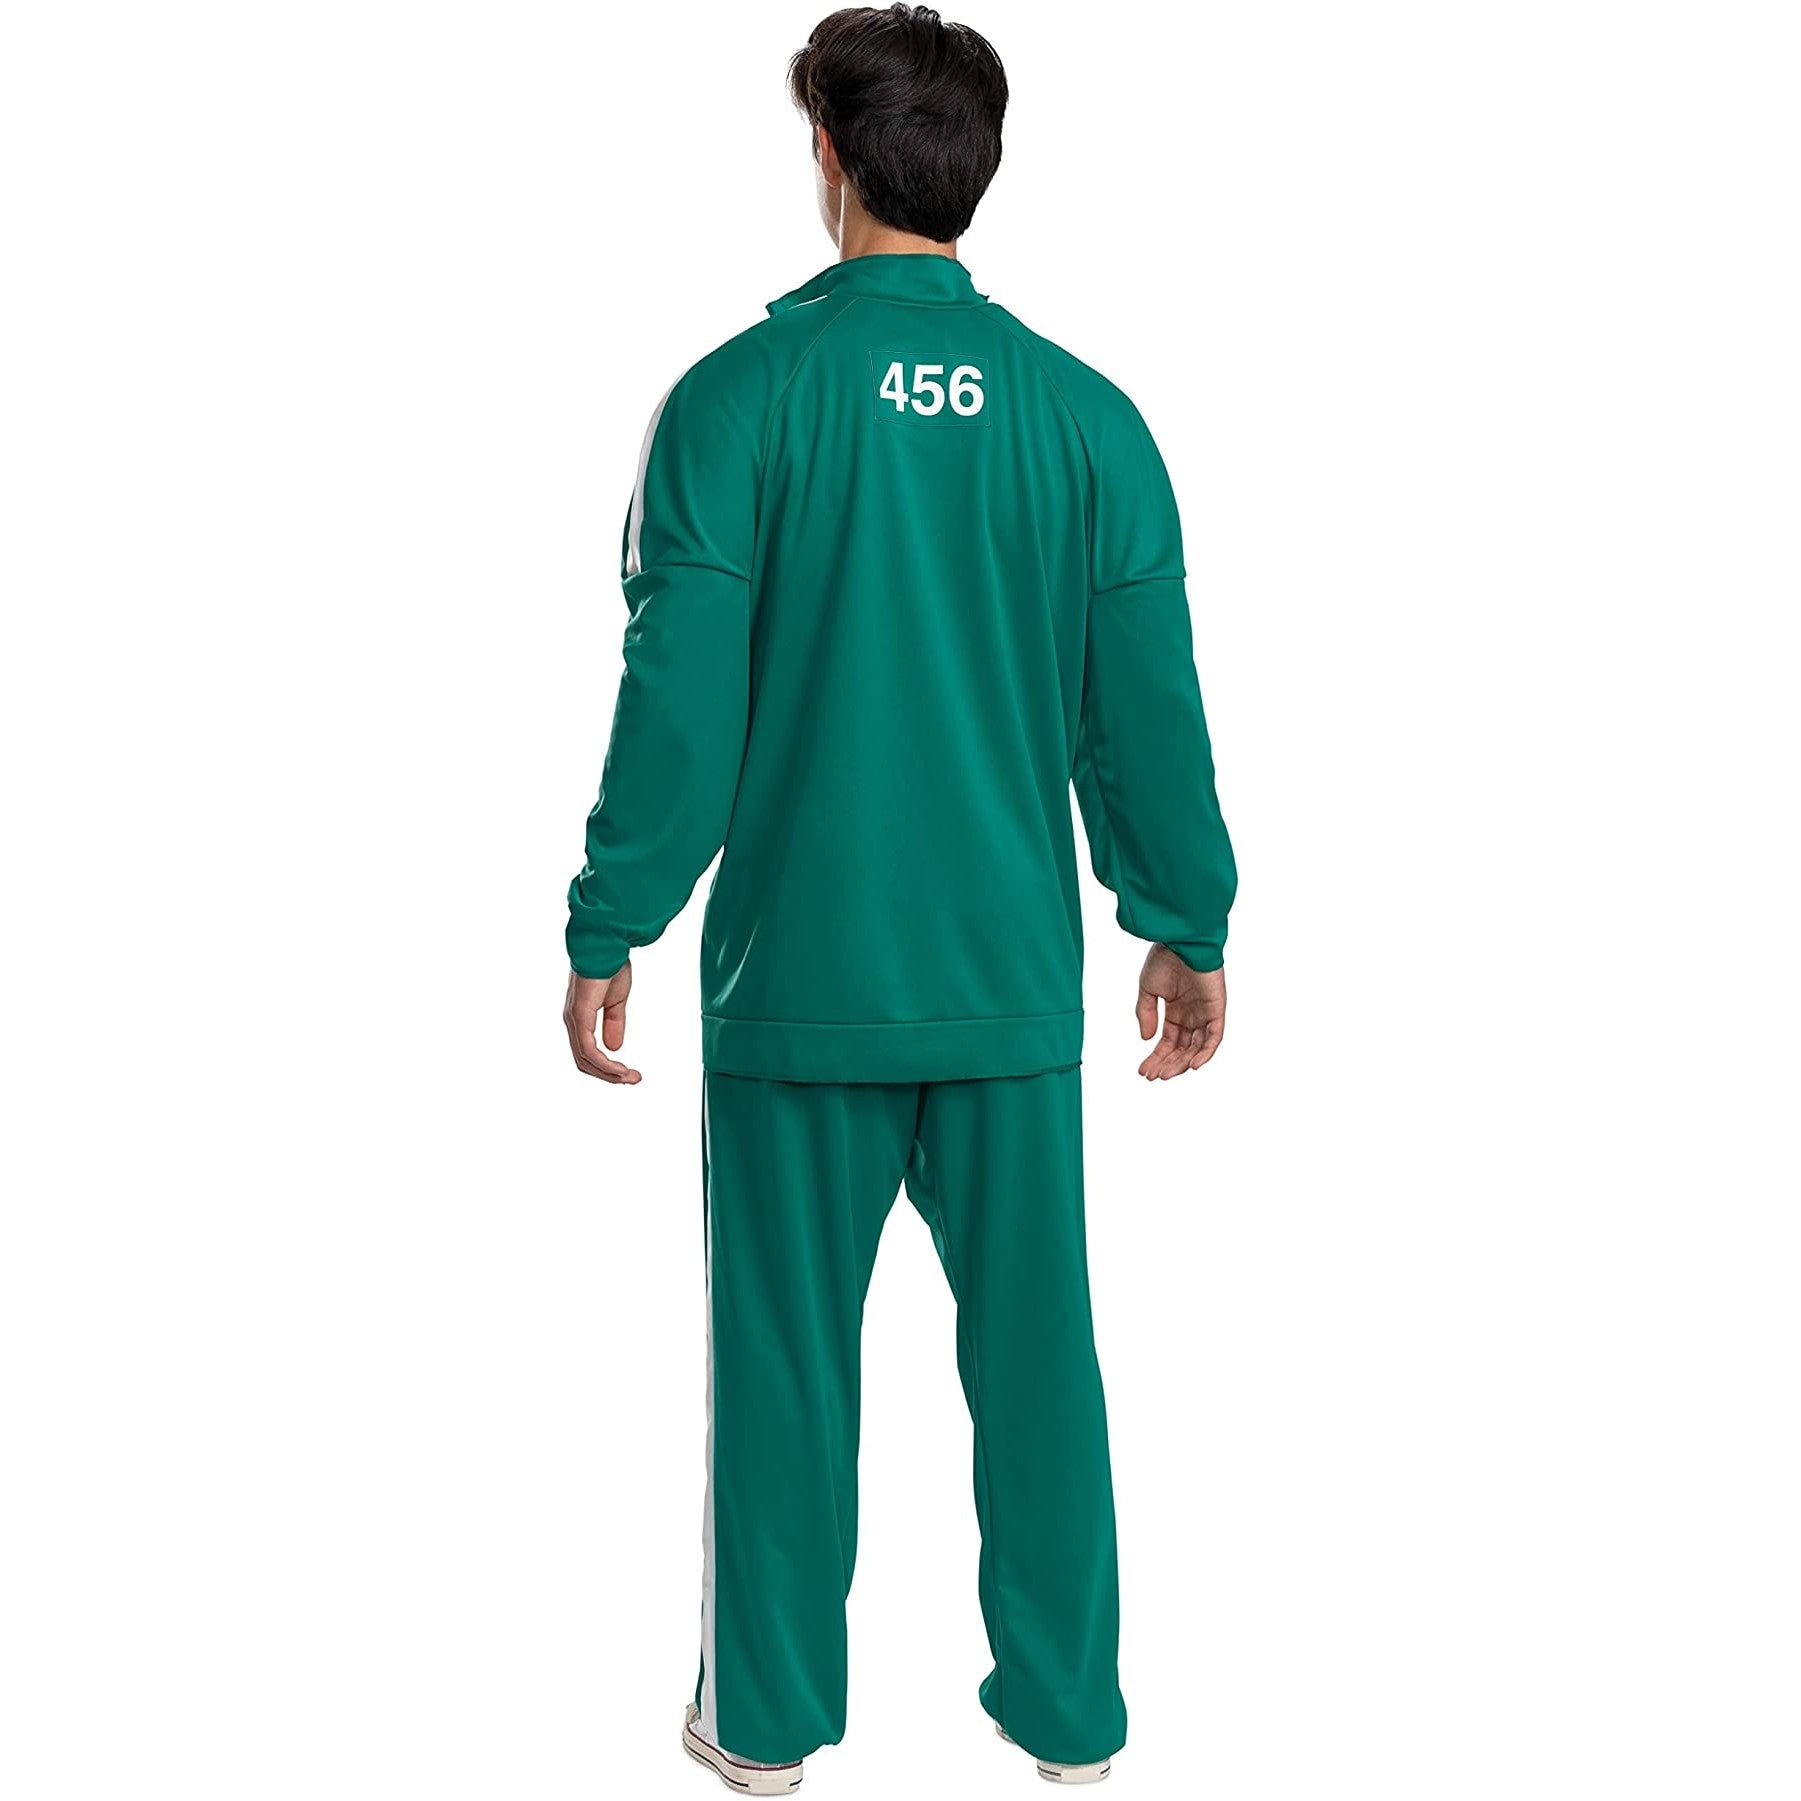 Become a Squid Game player in this Player 456 Track Suit costume